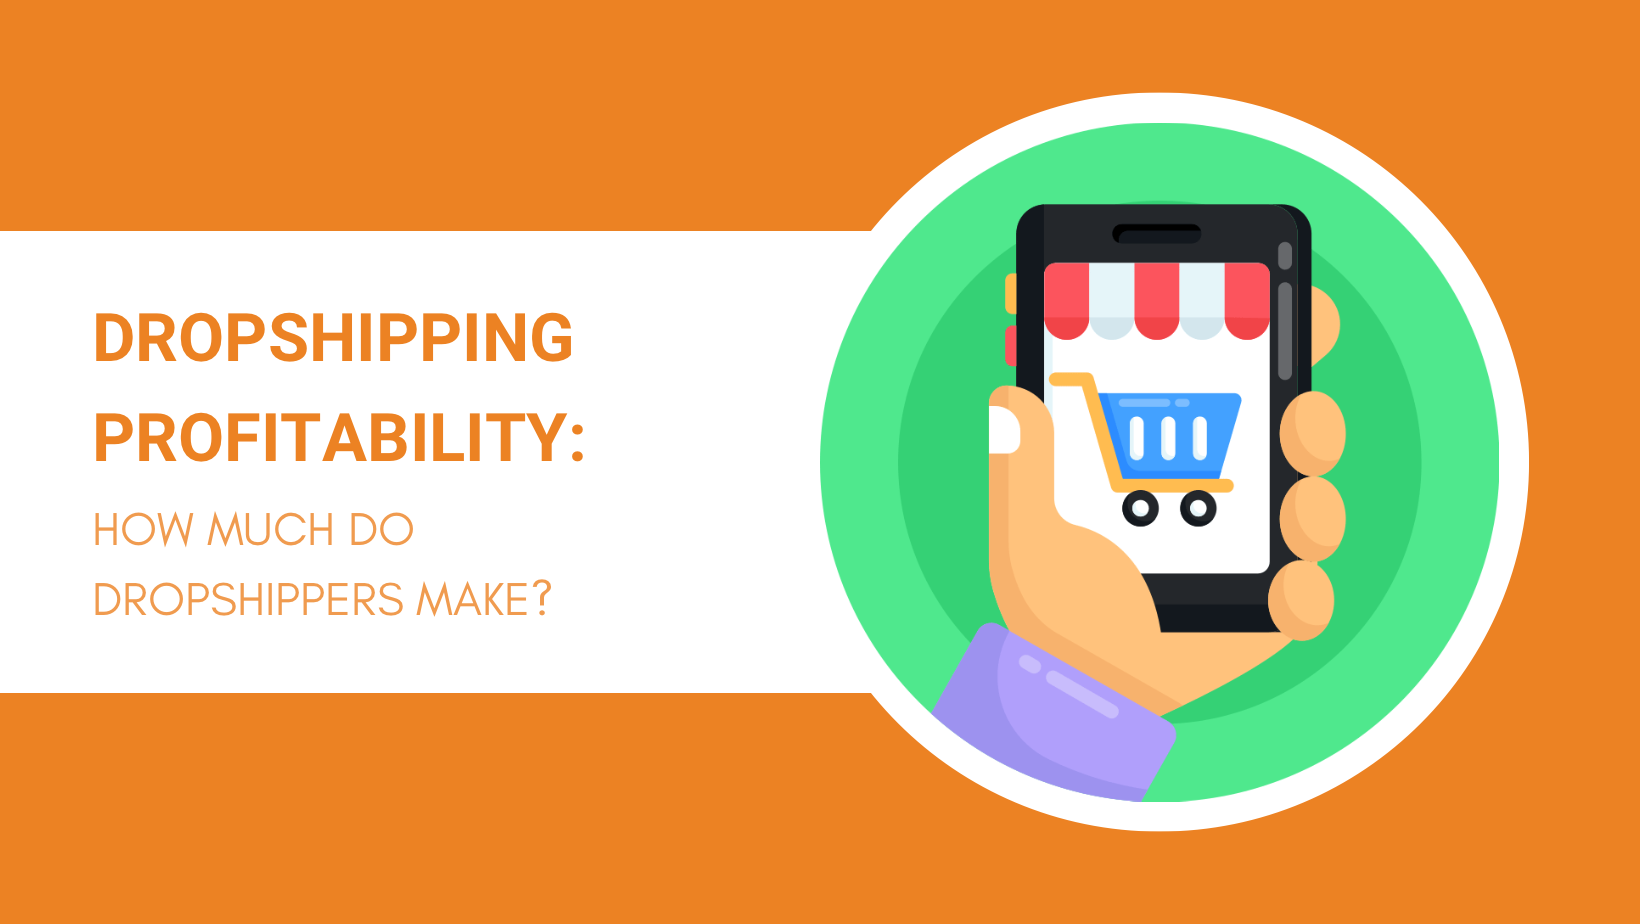 DROPSHIPPING PROFITABILITY HOW MUCH DO DROPSHIPPERS MAKE